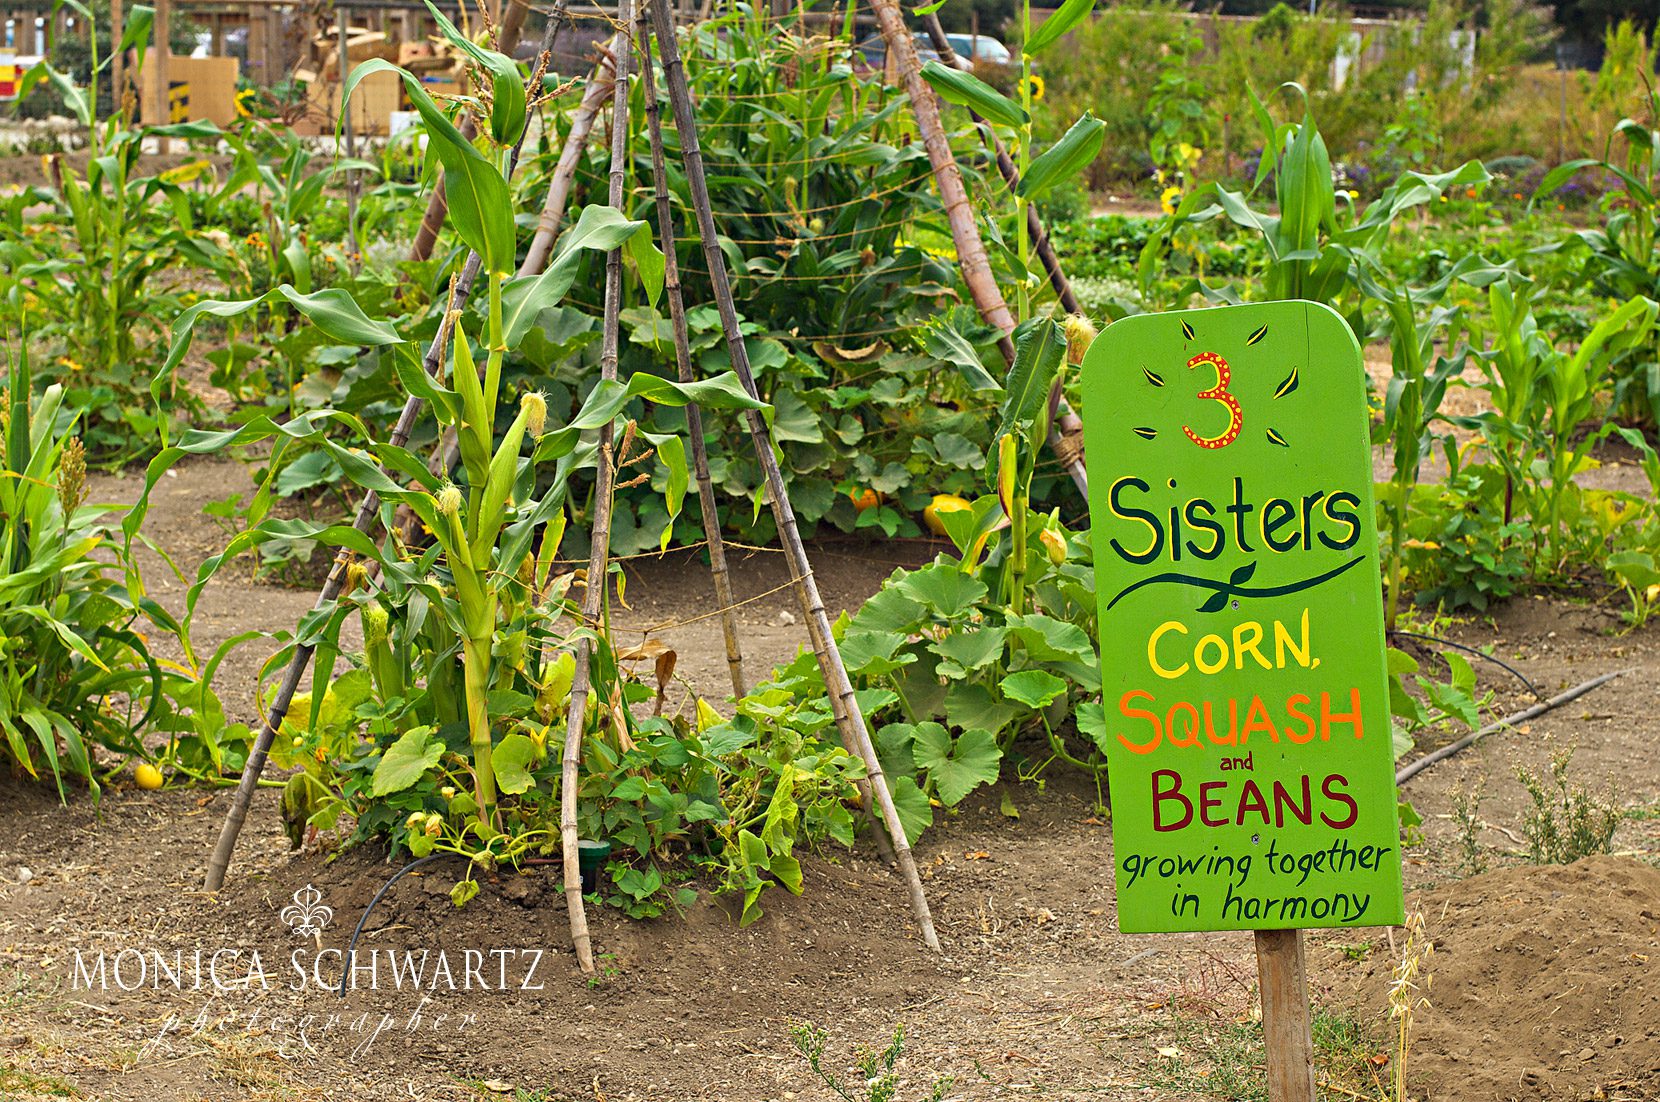 Corn-Squash-and-Beans-at-Earthbound-Farms-in-Carmel-Valley-California